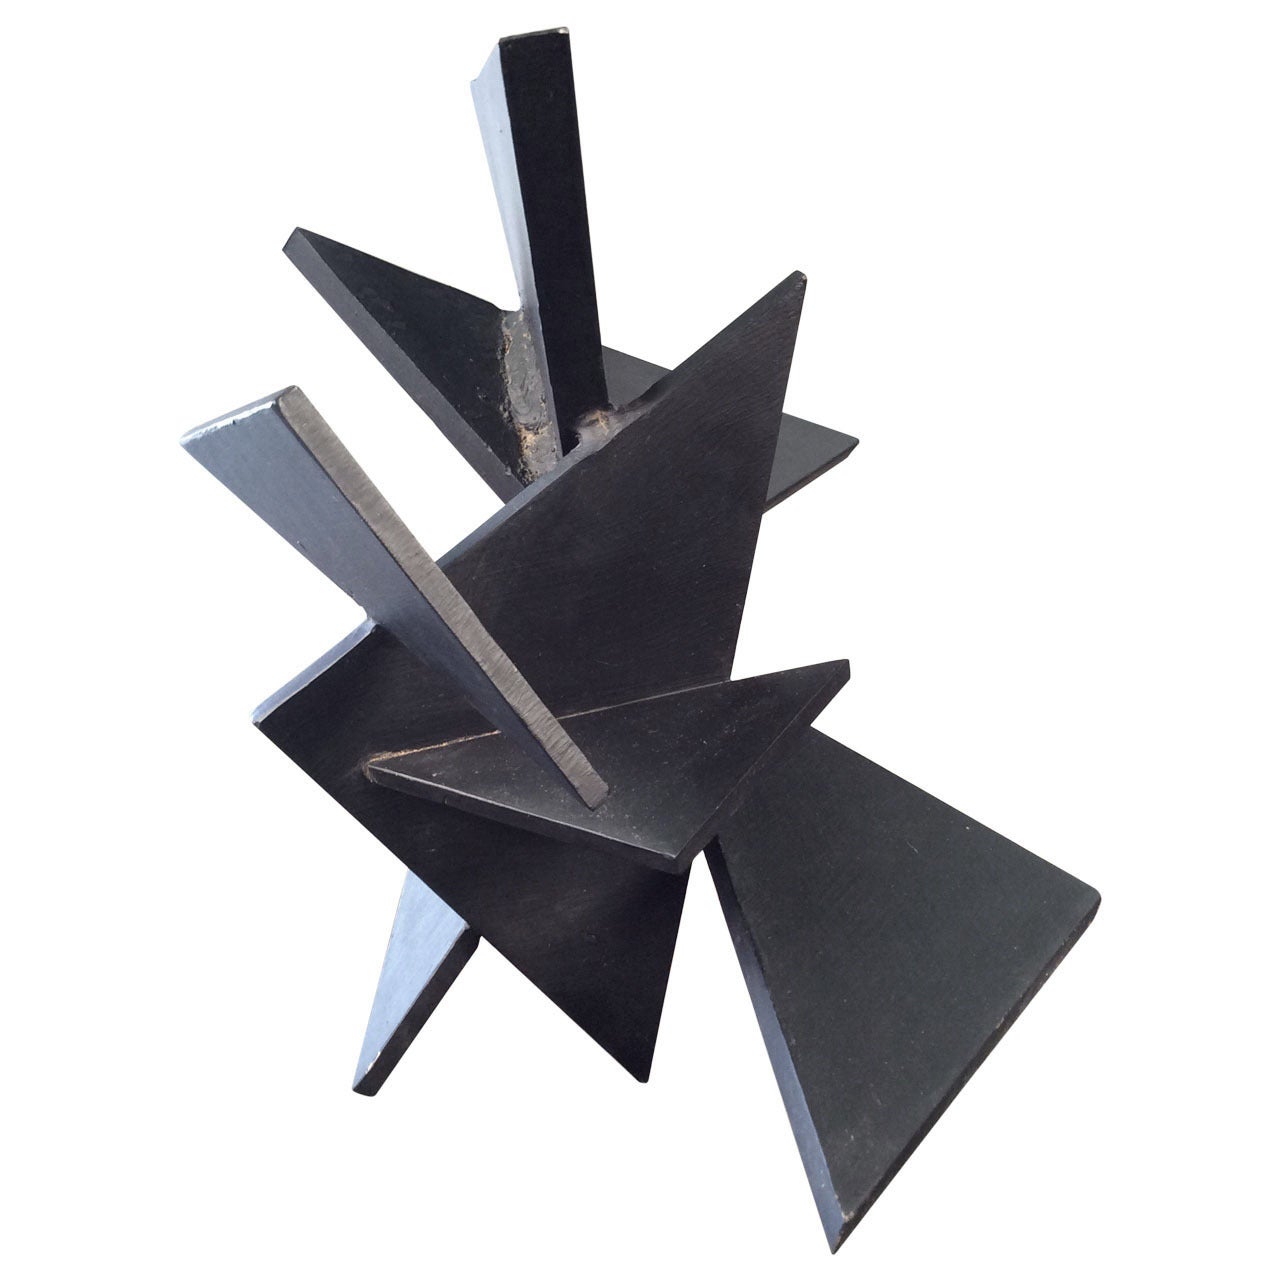 Geometric Constructivist Table Sculpture Composed of Thick Steel Triangles, 1984